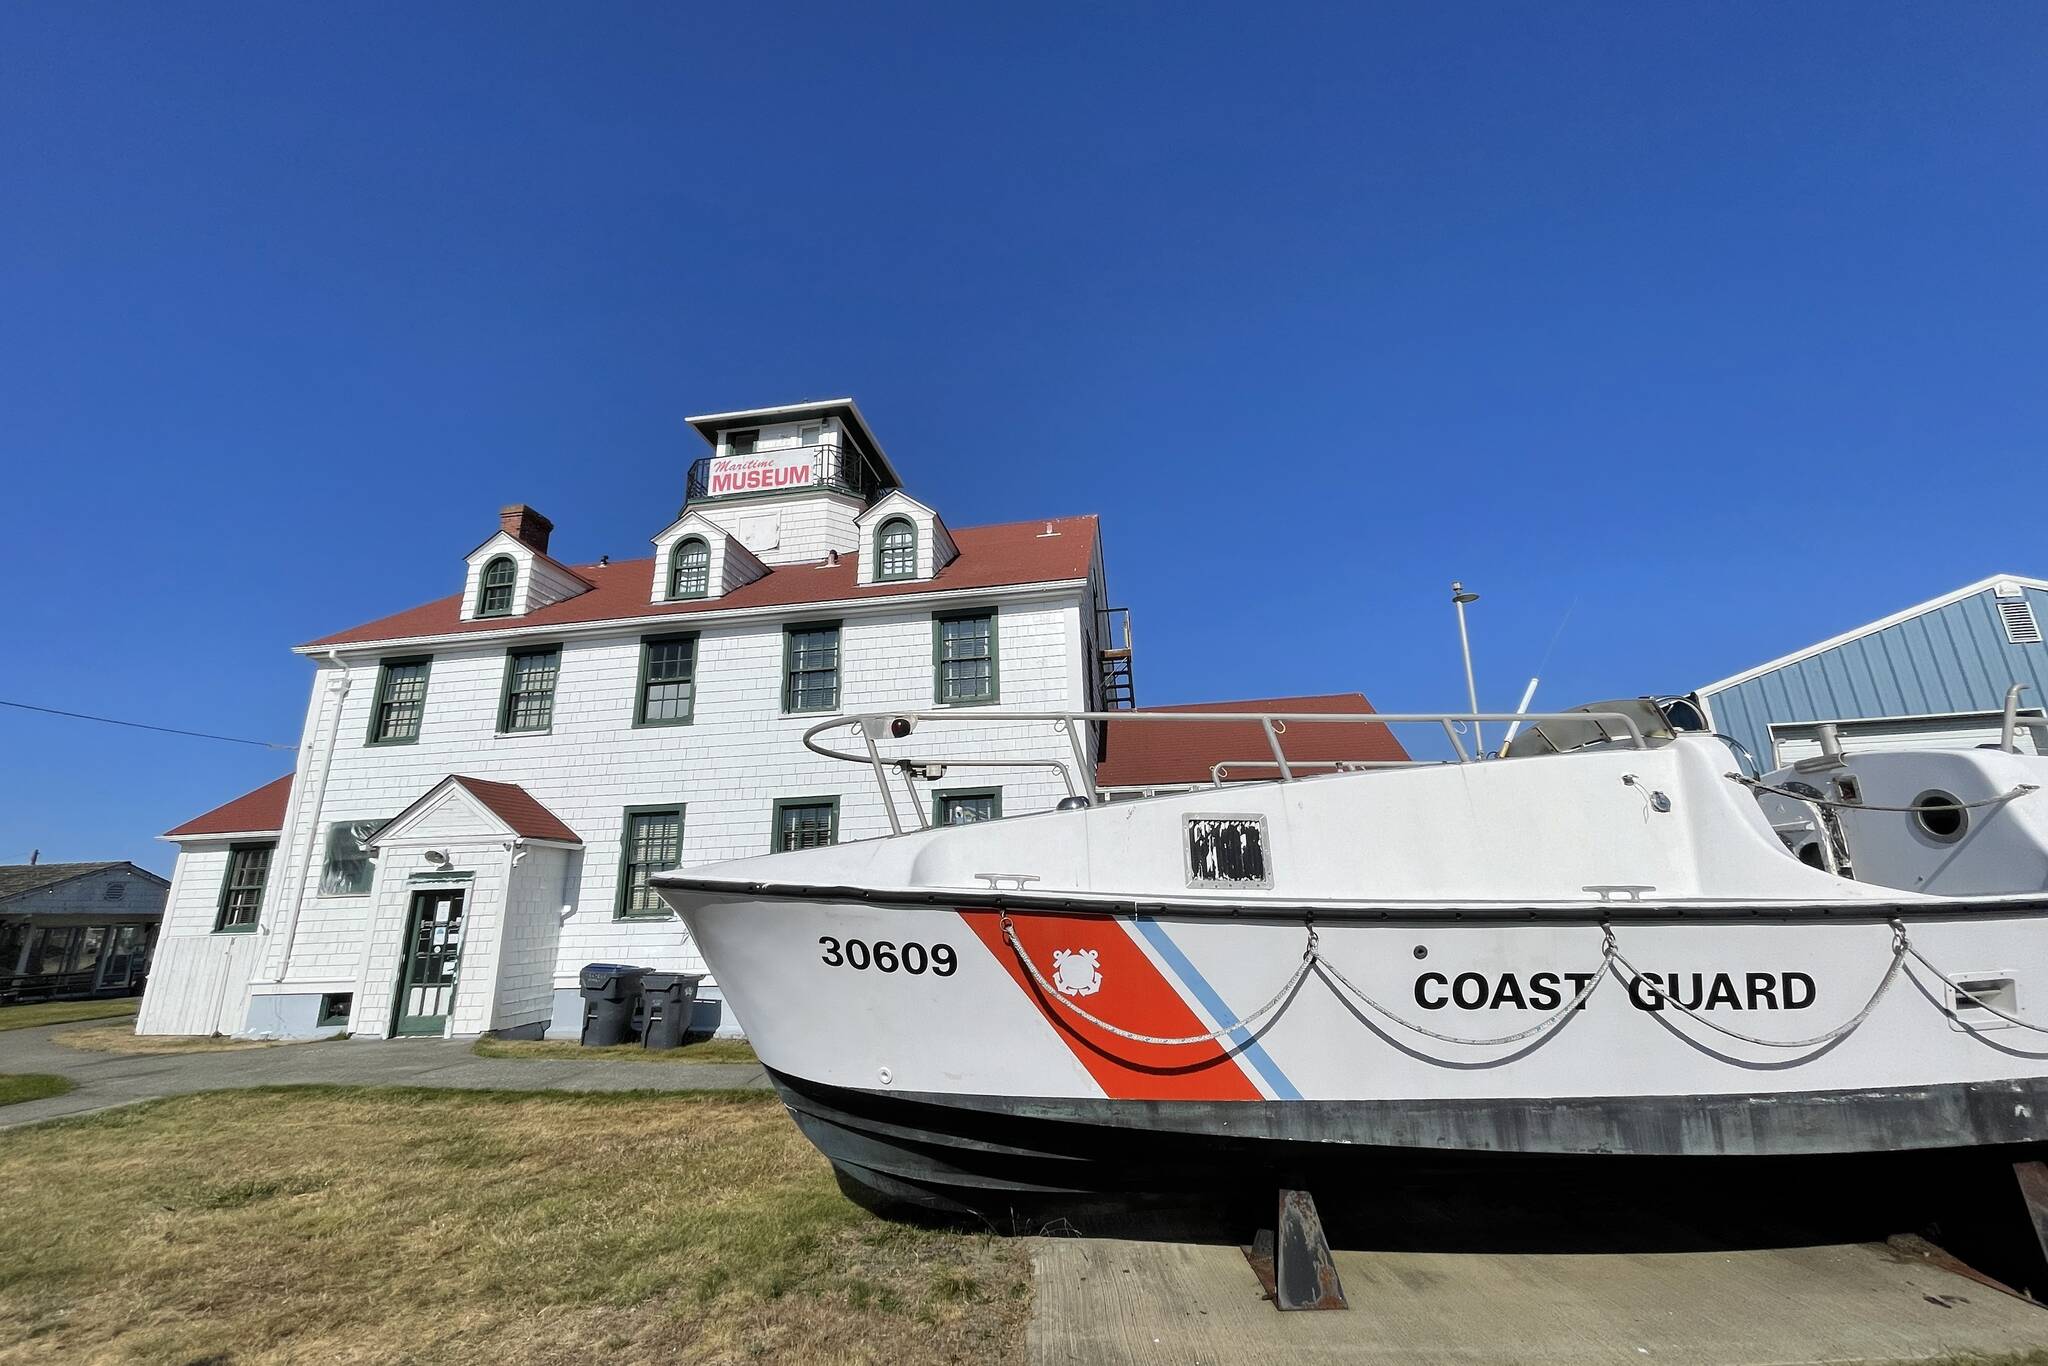 The Coast Guard is seeking comments on a study of navigation routes off the West Coast, including the Grays Harbor area. (Michael S. Lockett / The Daily World)